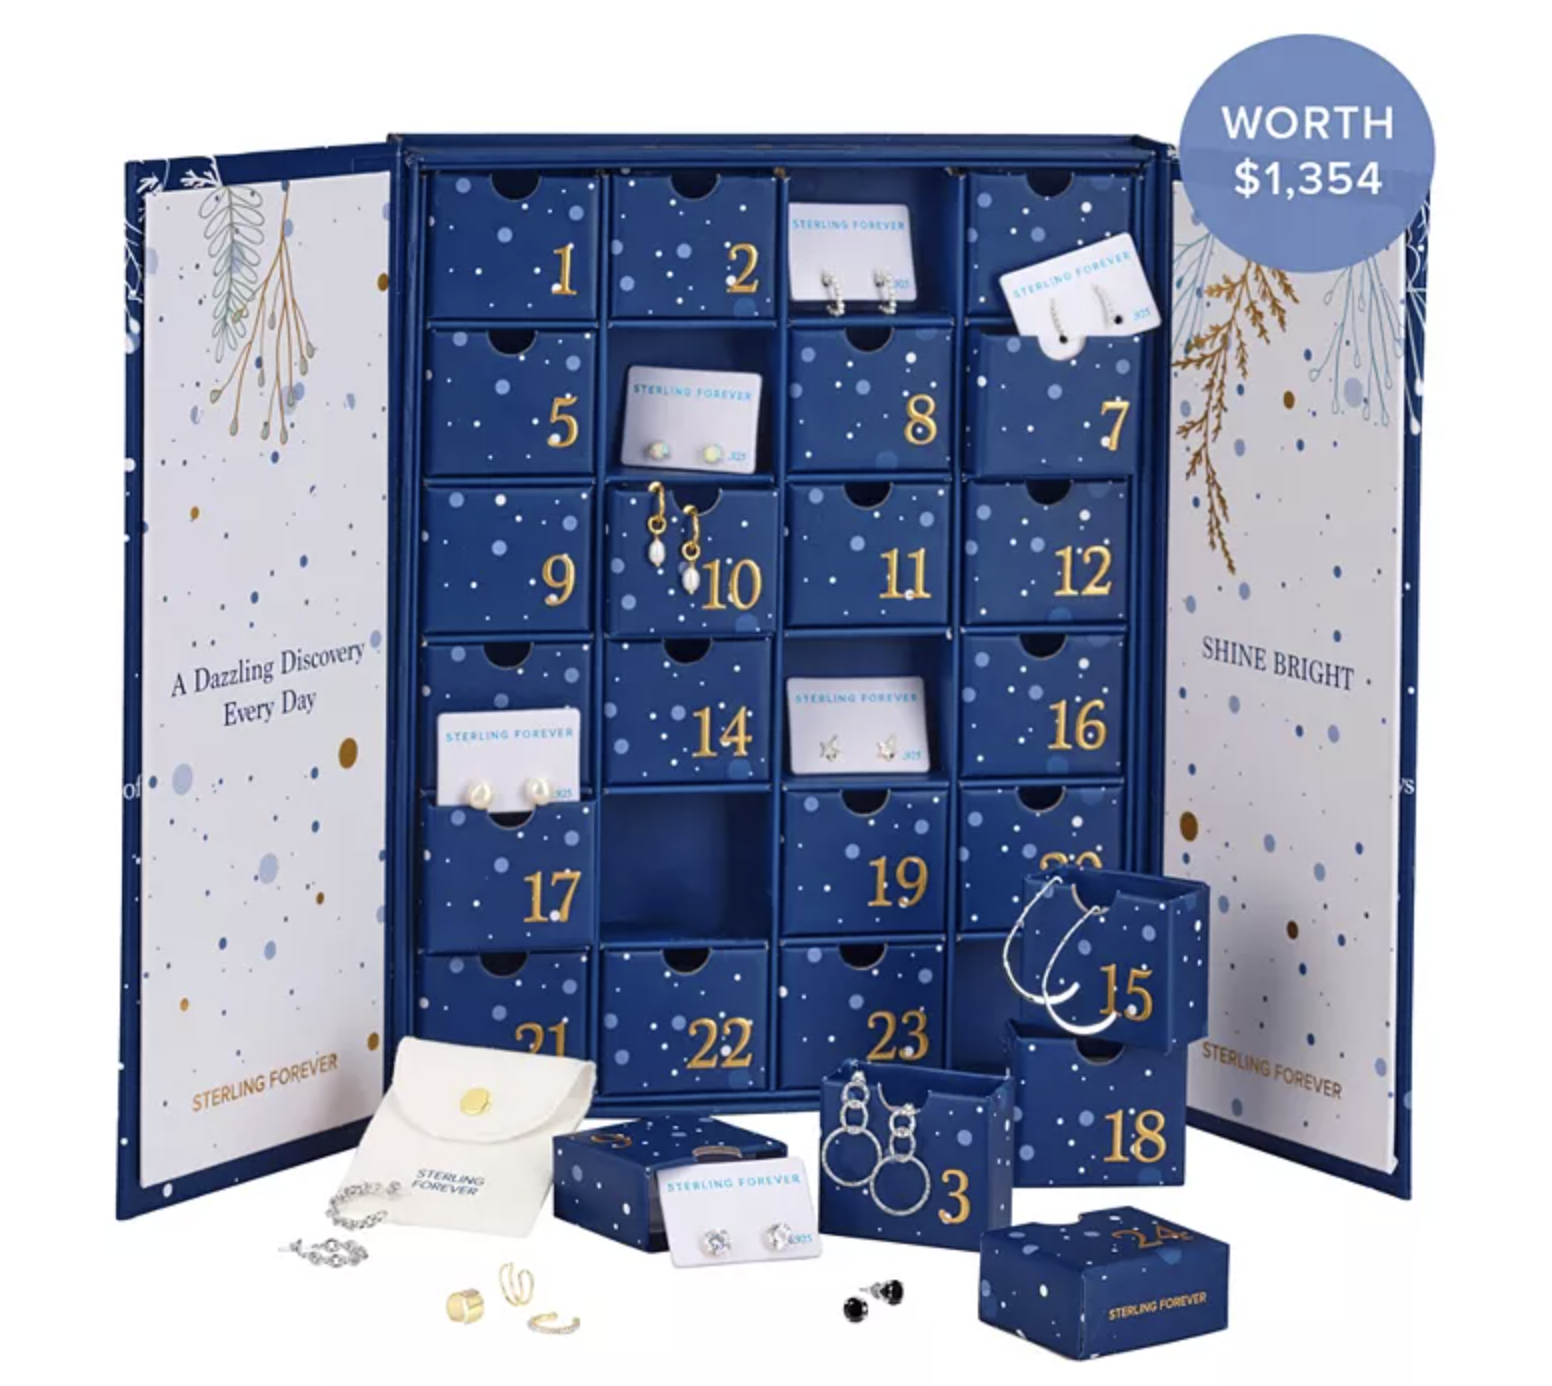 These 7 advent calendars are a fun way to count down to Christmas 2021 